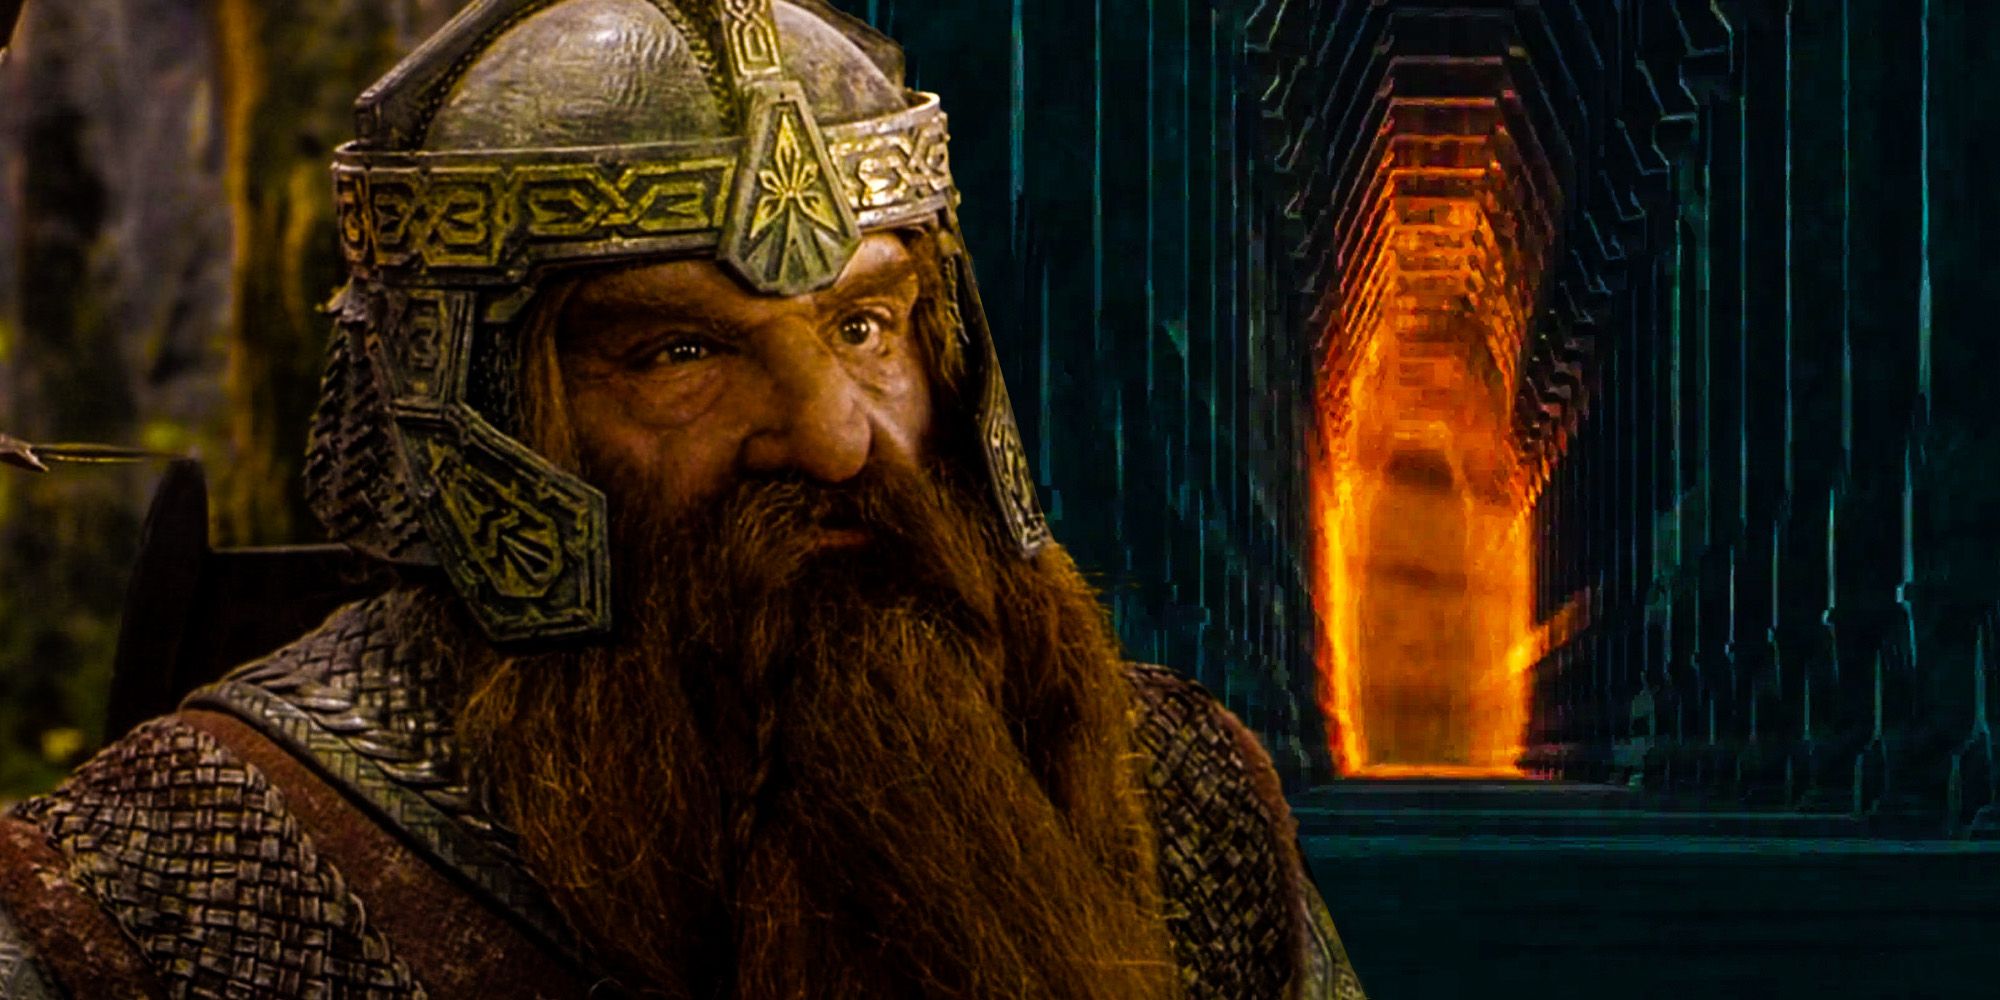 Digging into The Lord of the Rings: Return to Moria development